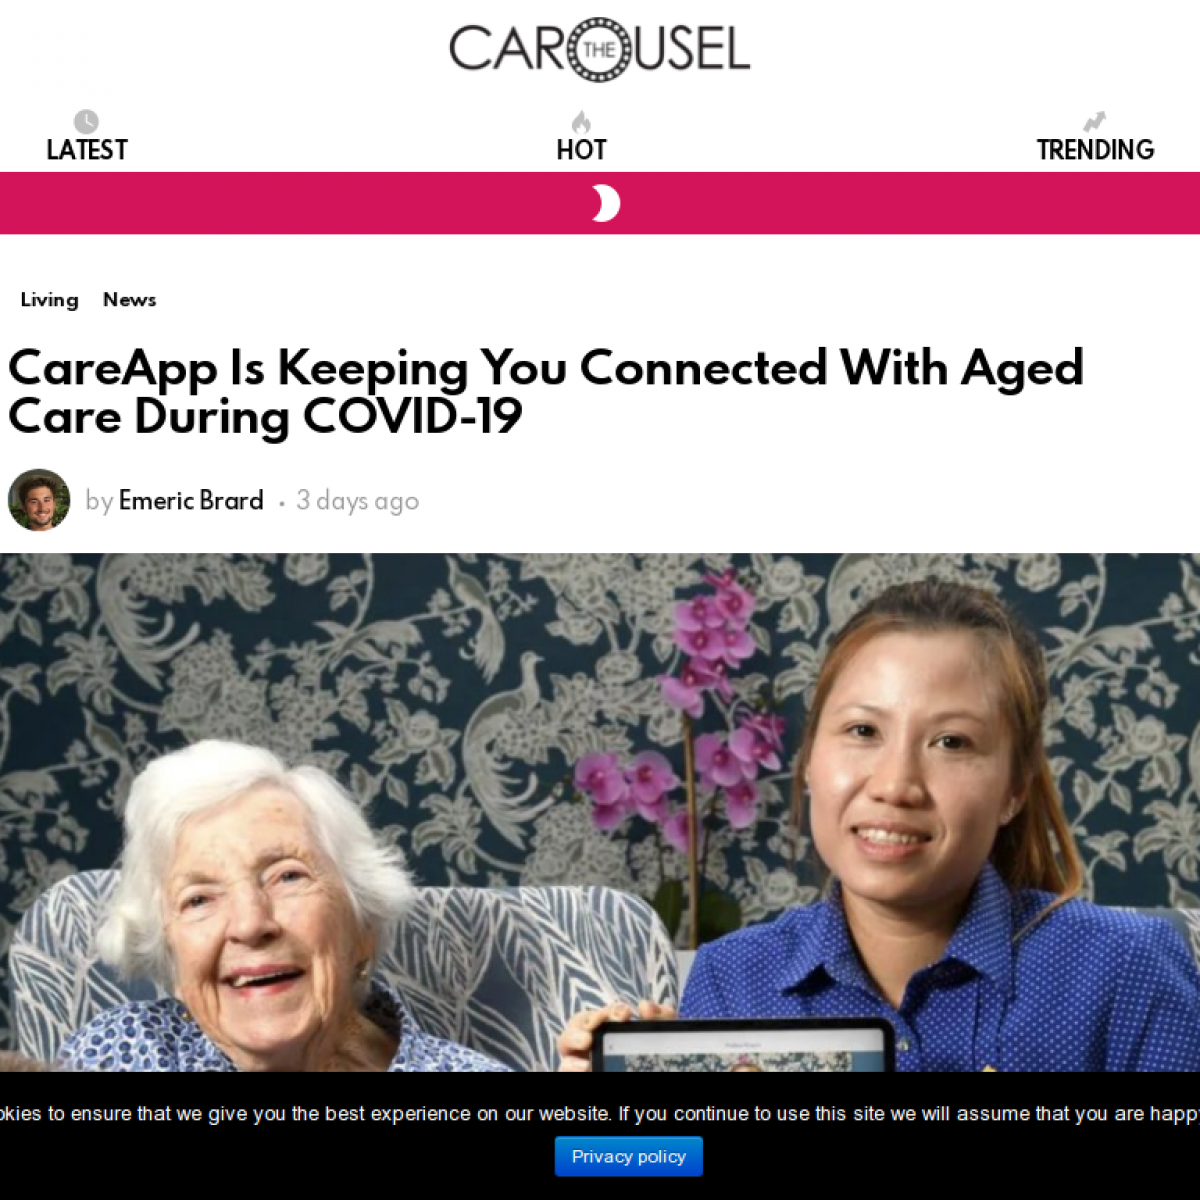 CareApp Is Keeping You Connected With Aged Care During COVID-19